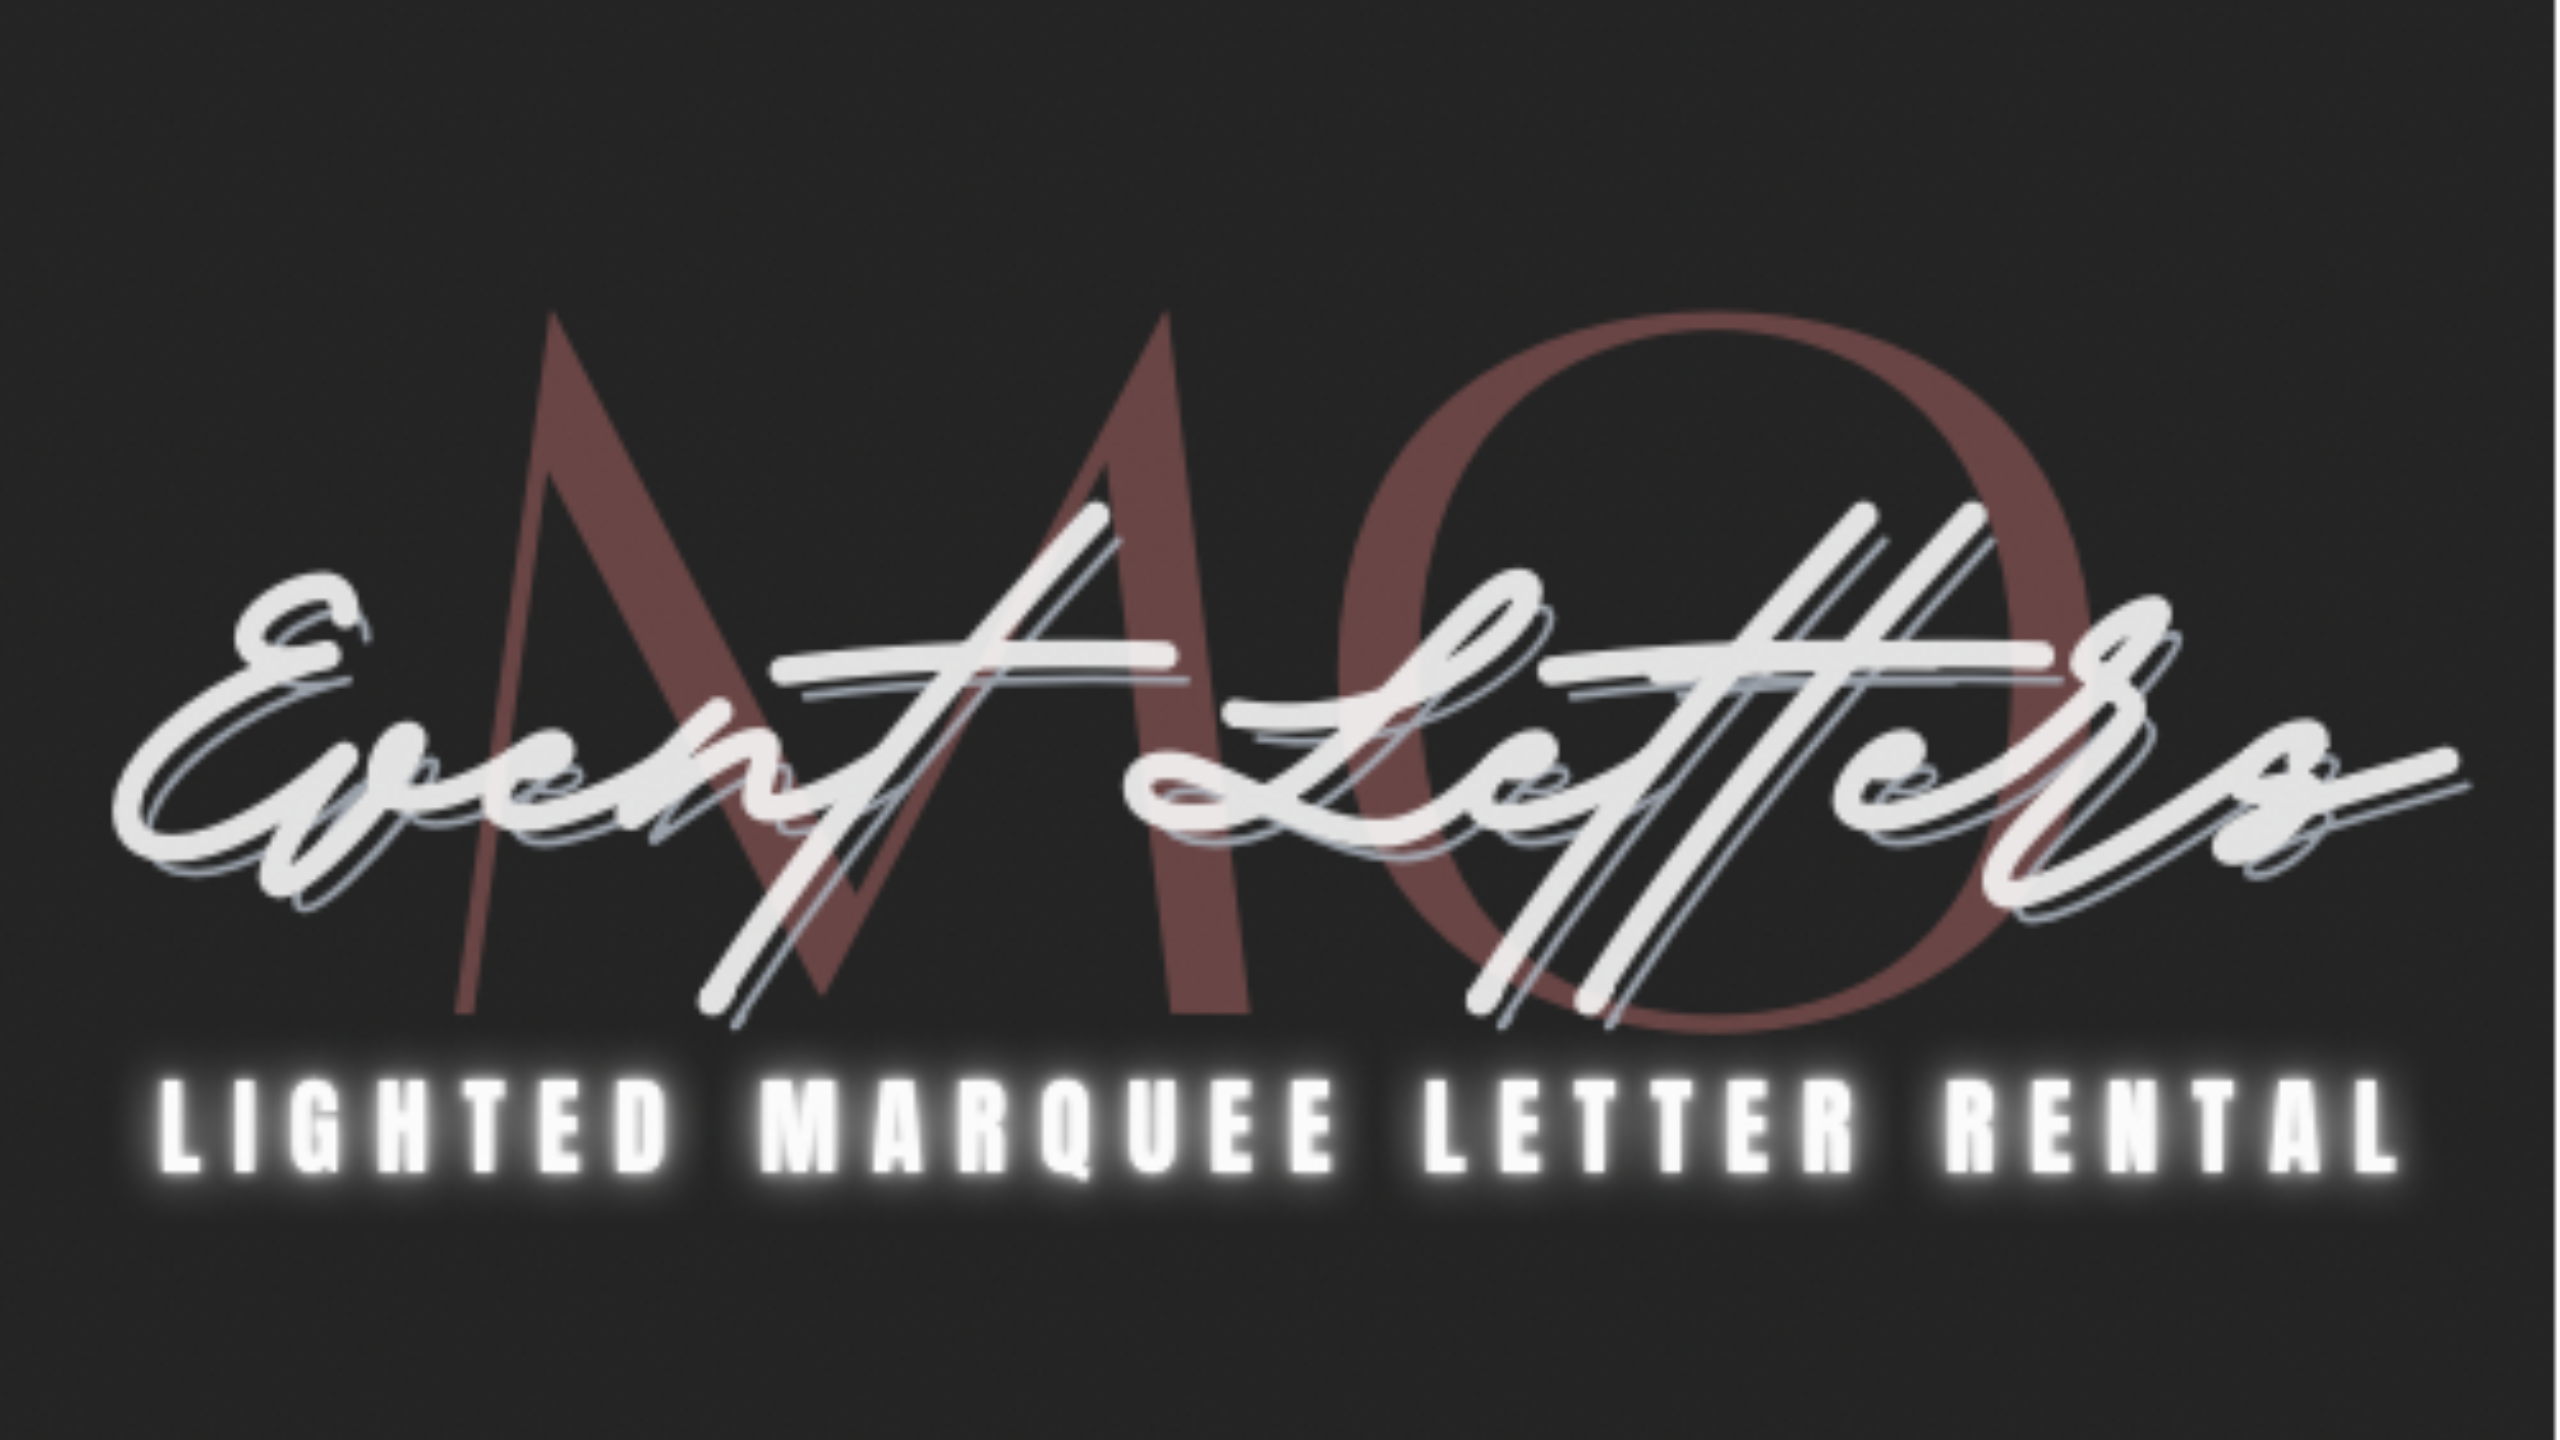 Event Letters MO